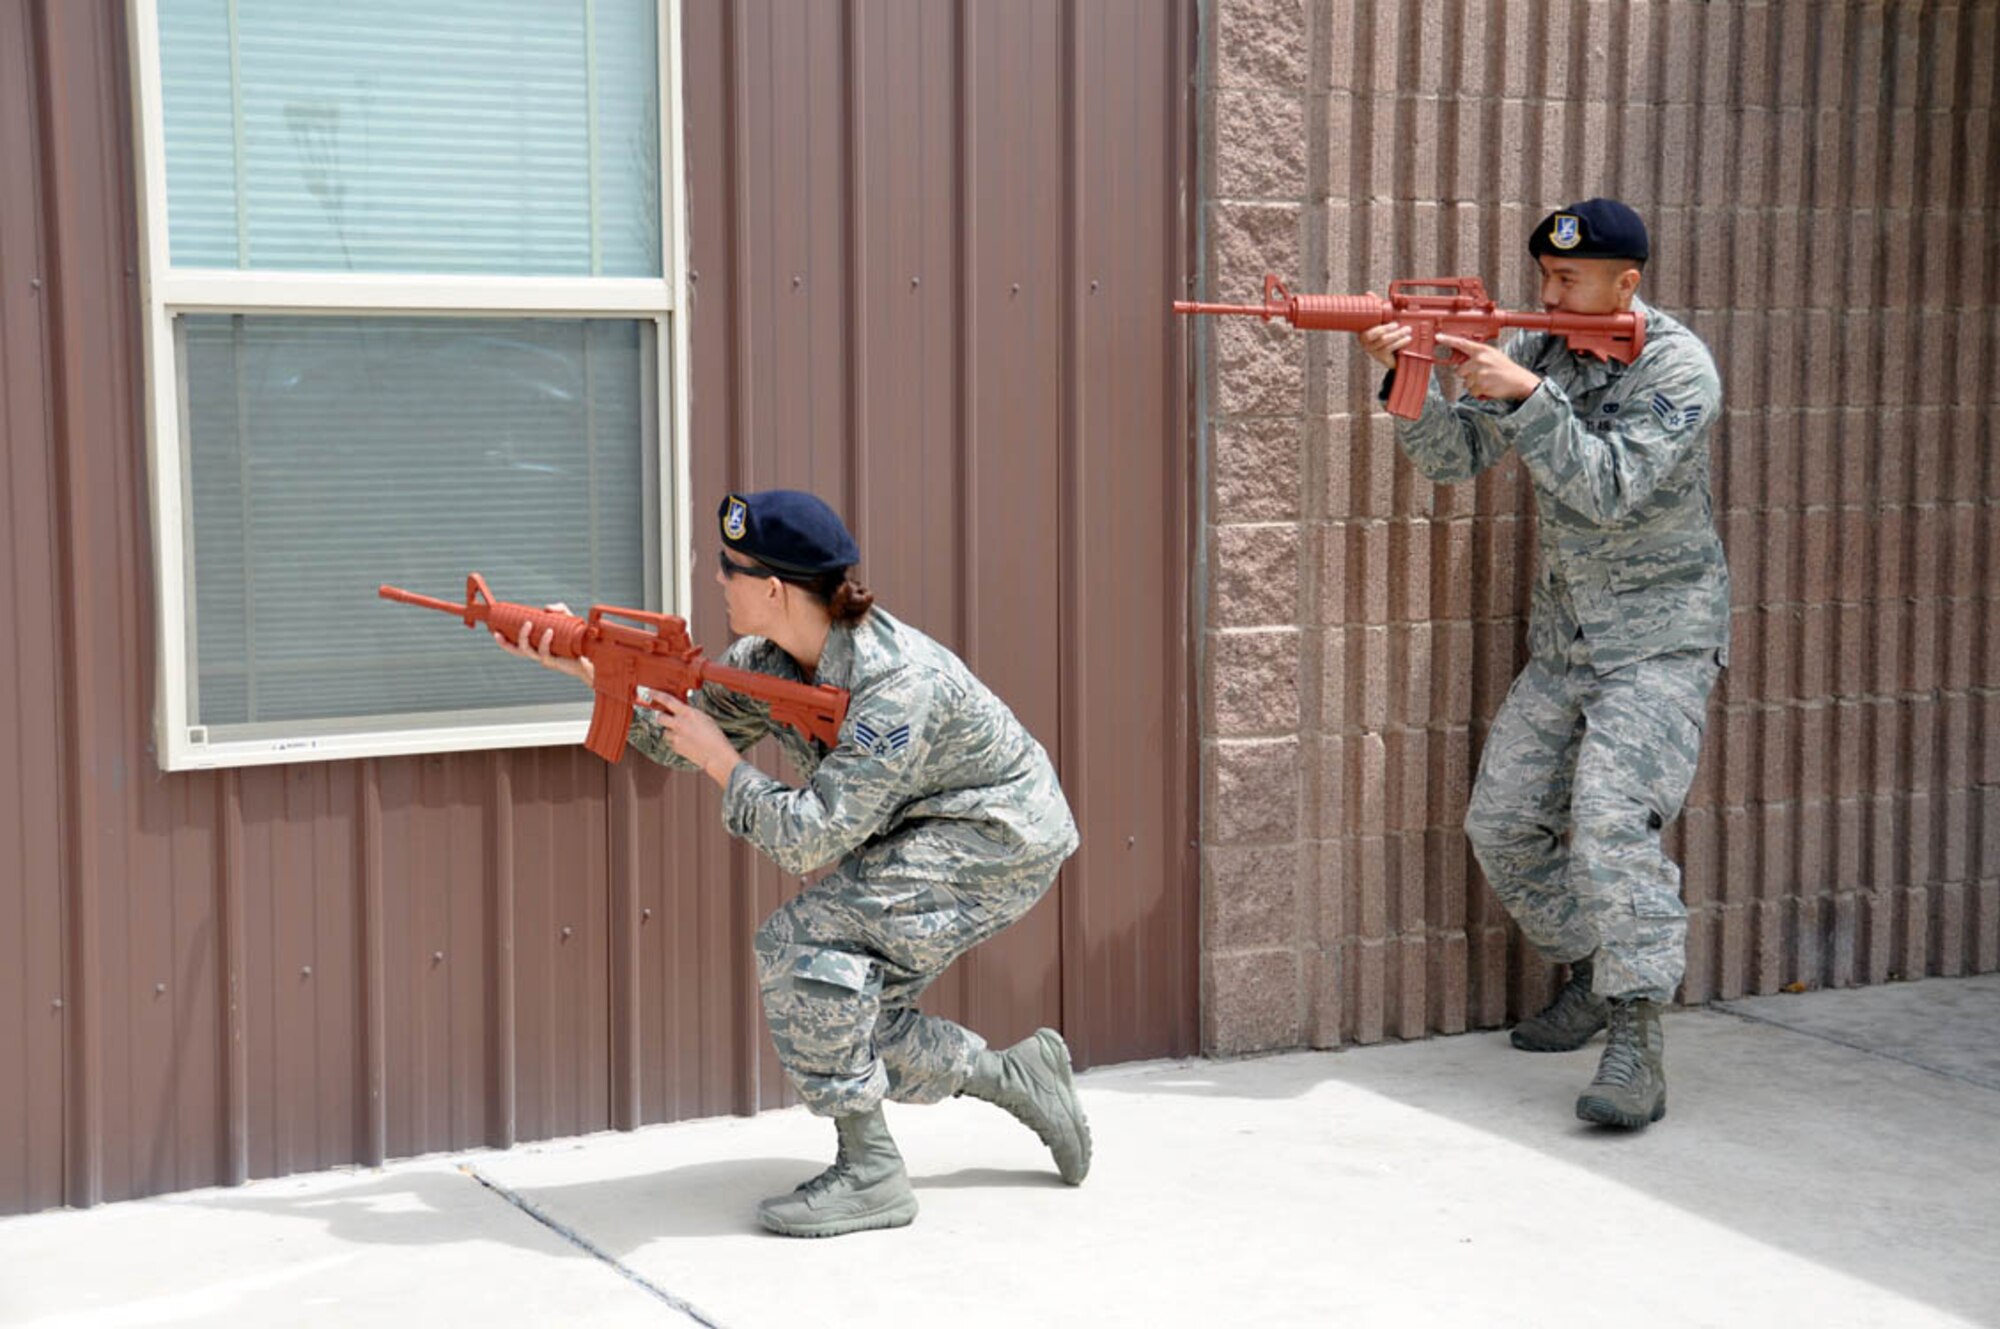 NELLIS AIR FORCE BASE, Nev. -- (Right) Senior Airmen Michael Legaspi and Jessica Rayl, 926th Security Forces Squadron, train on how to clear a building after a simulated alarm activation here April 7, 2013. (U.S. Air Force photo/Maj. Jessica Martin)